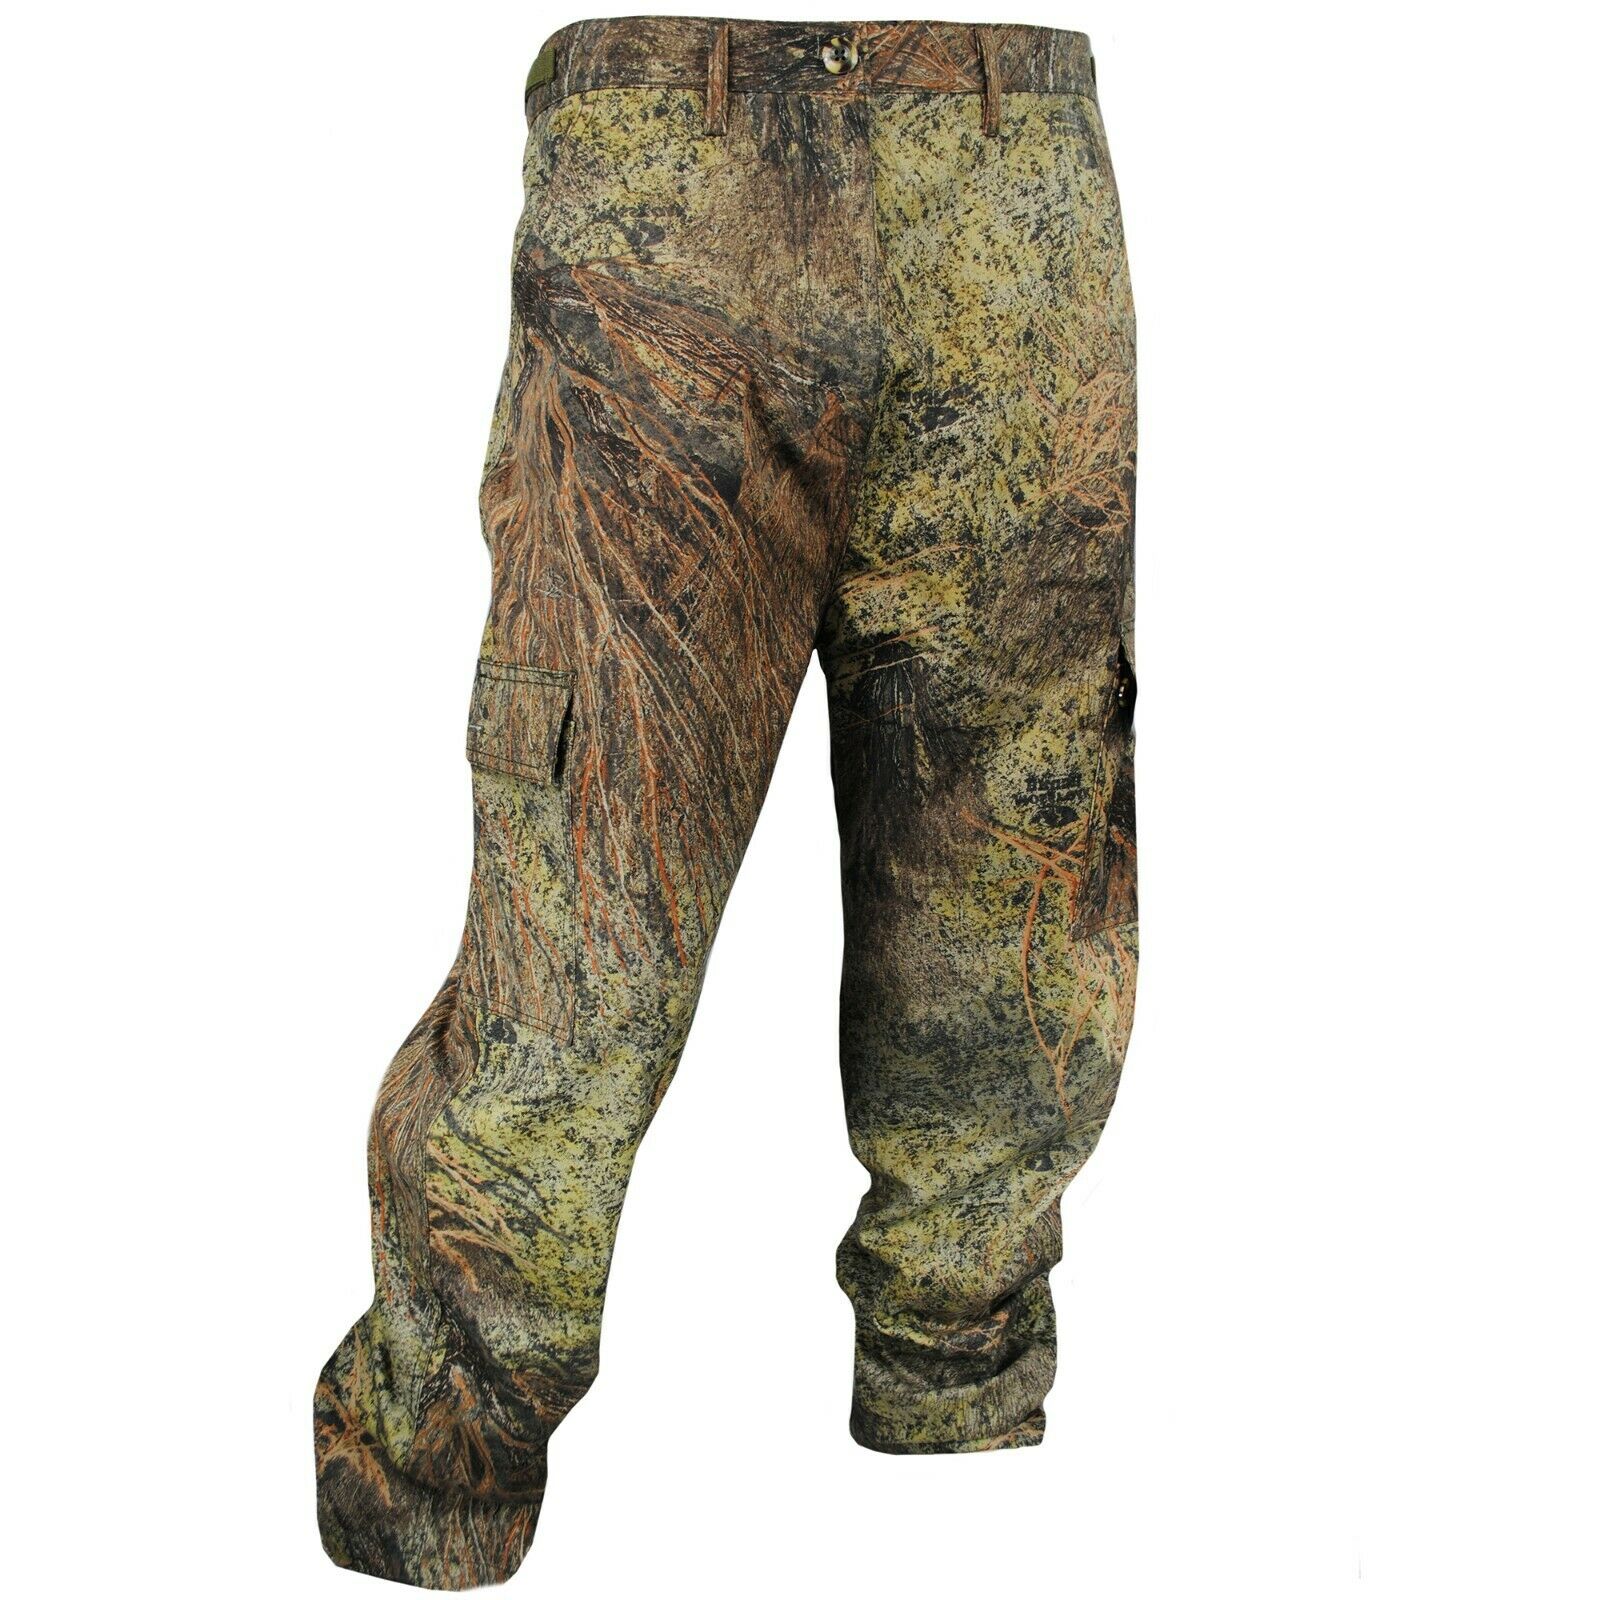 Cotton Mill Hunting Pants For Men Camouflage Clothes Mossy Oak Vintage Camo